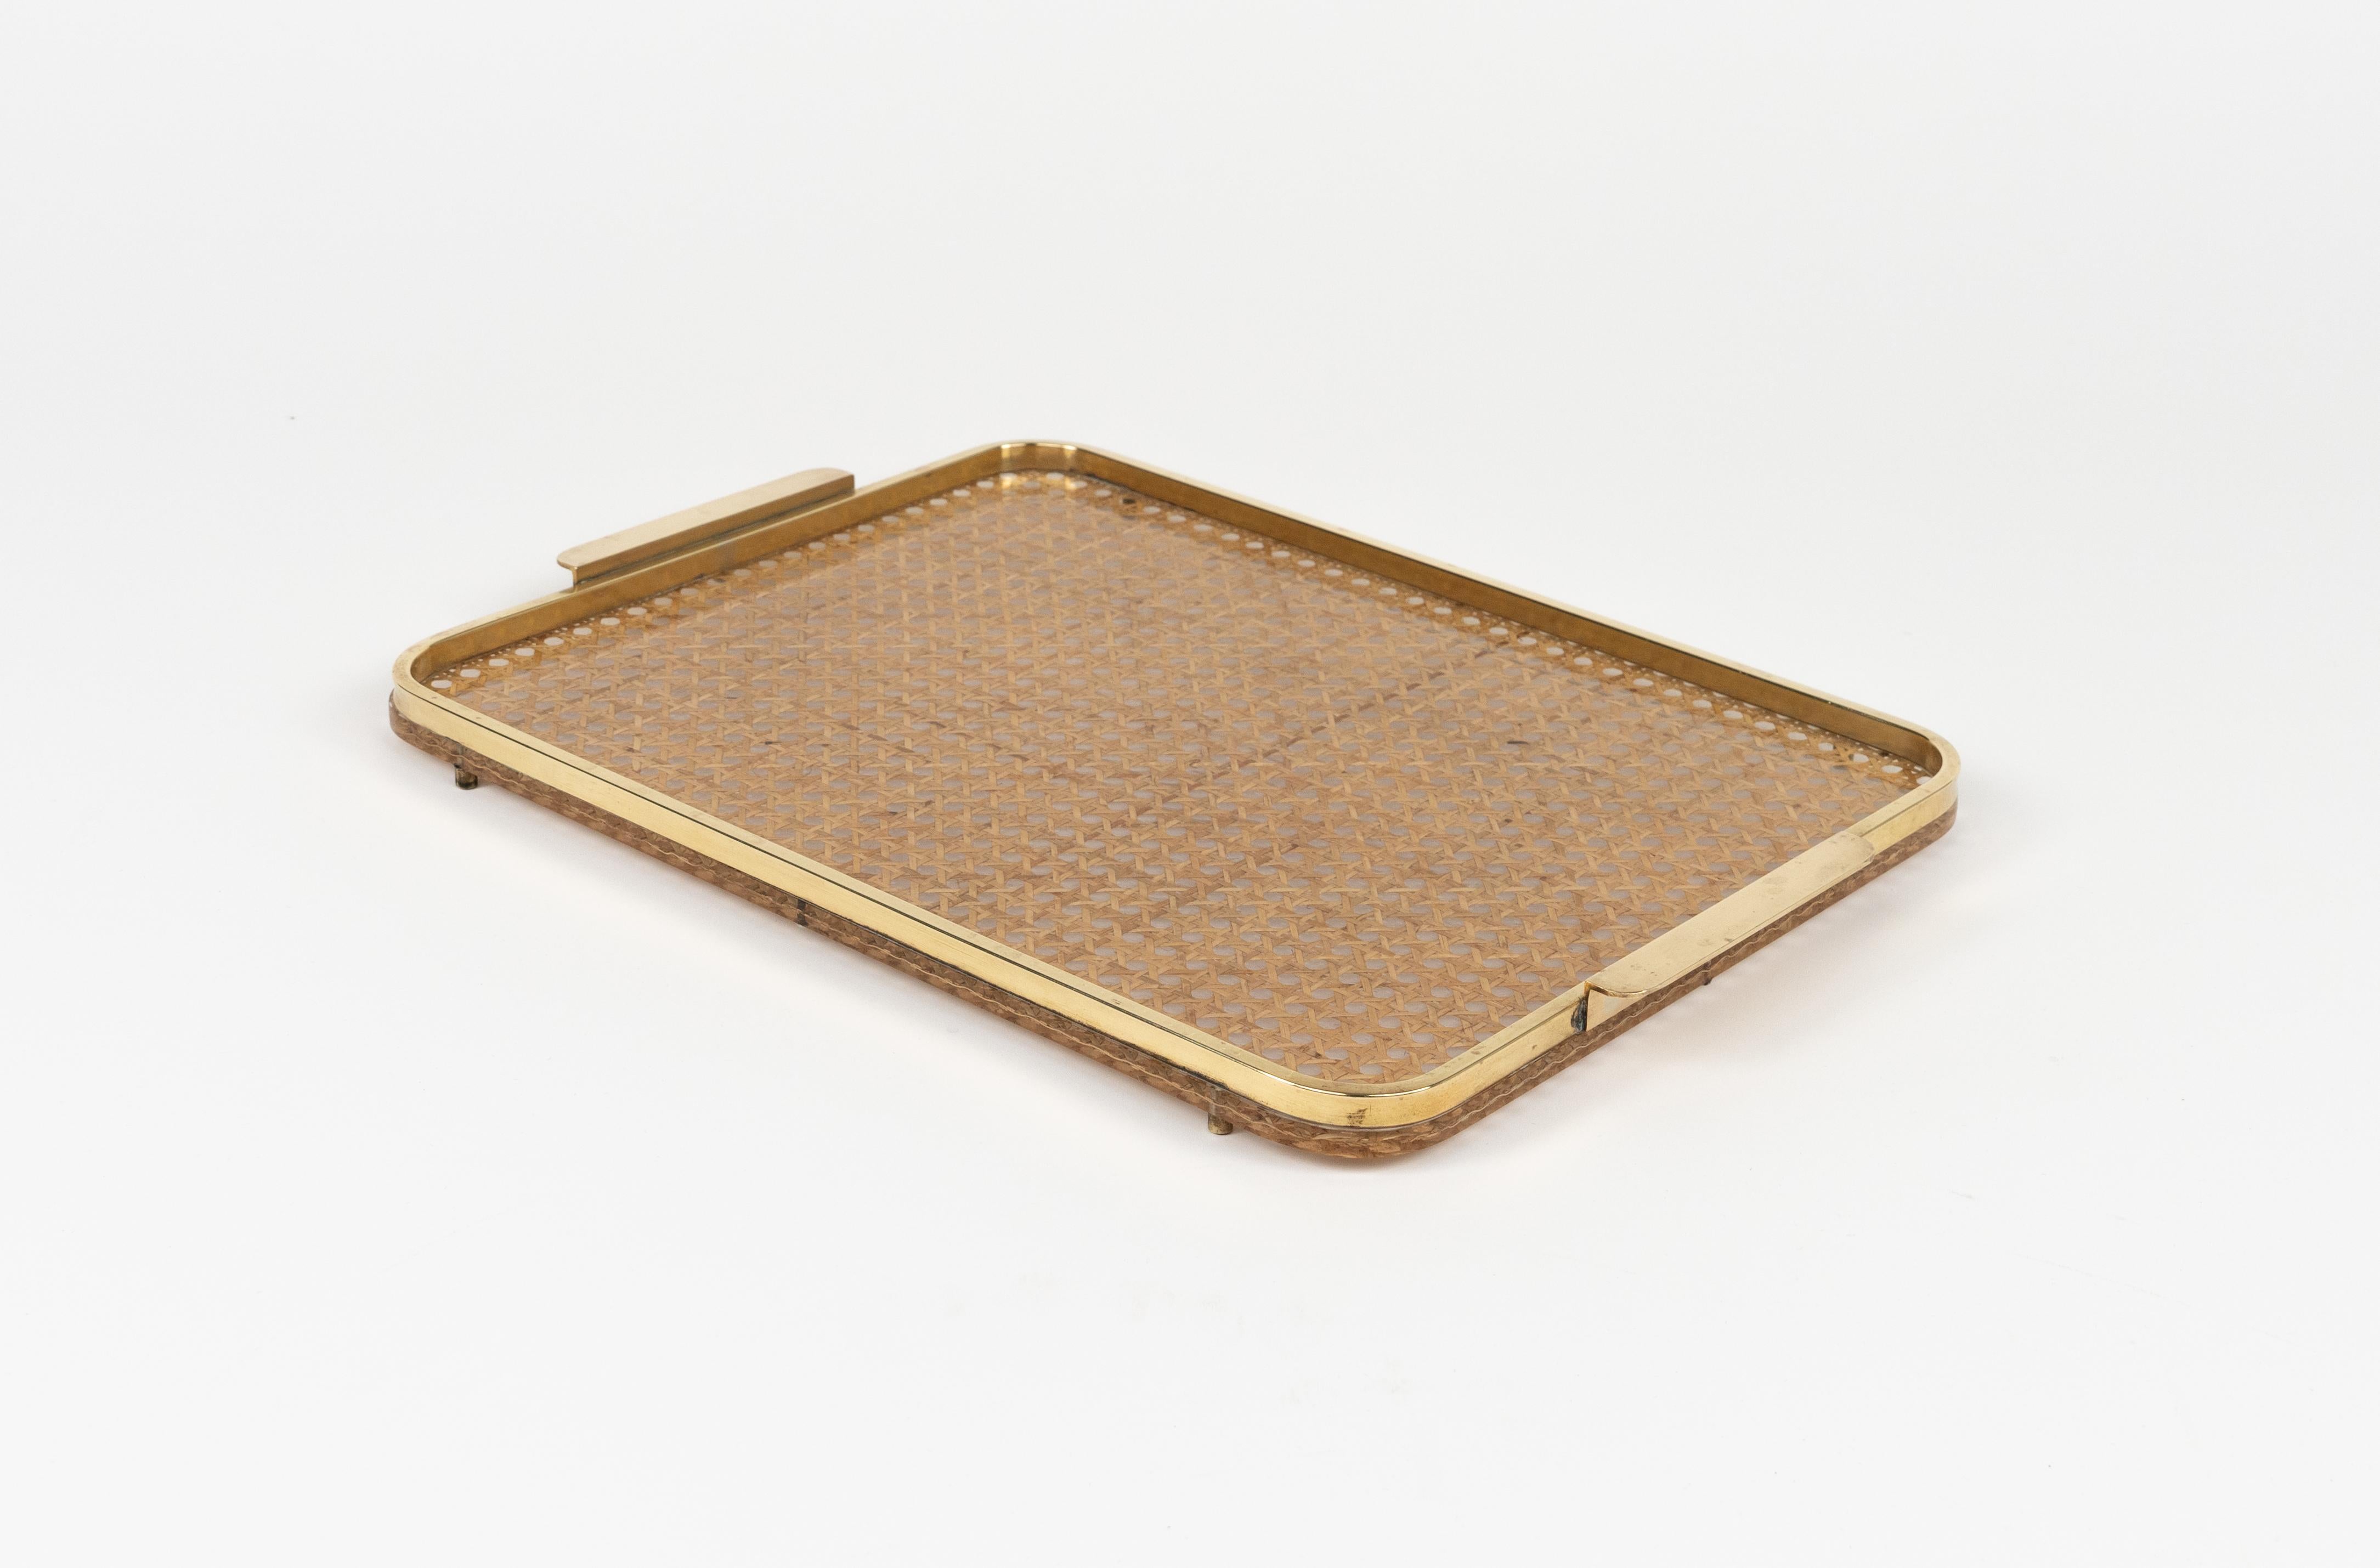 Serving Tray in Lucite, Rattan and Brass Christian Dior Style, Italy, 1970s For Sale 1